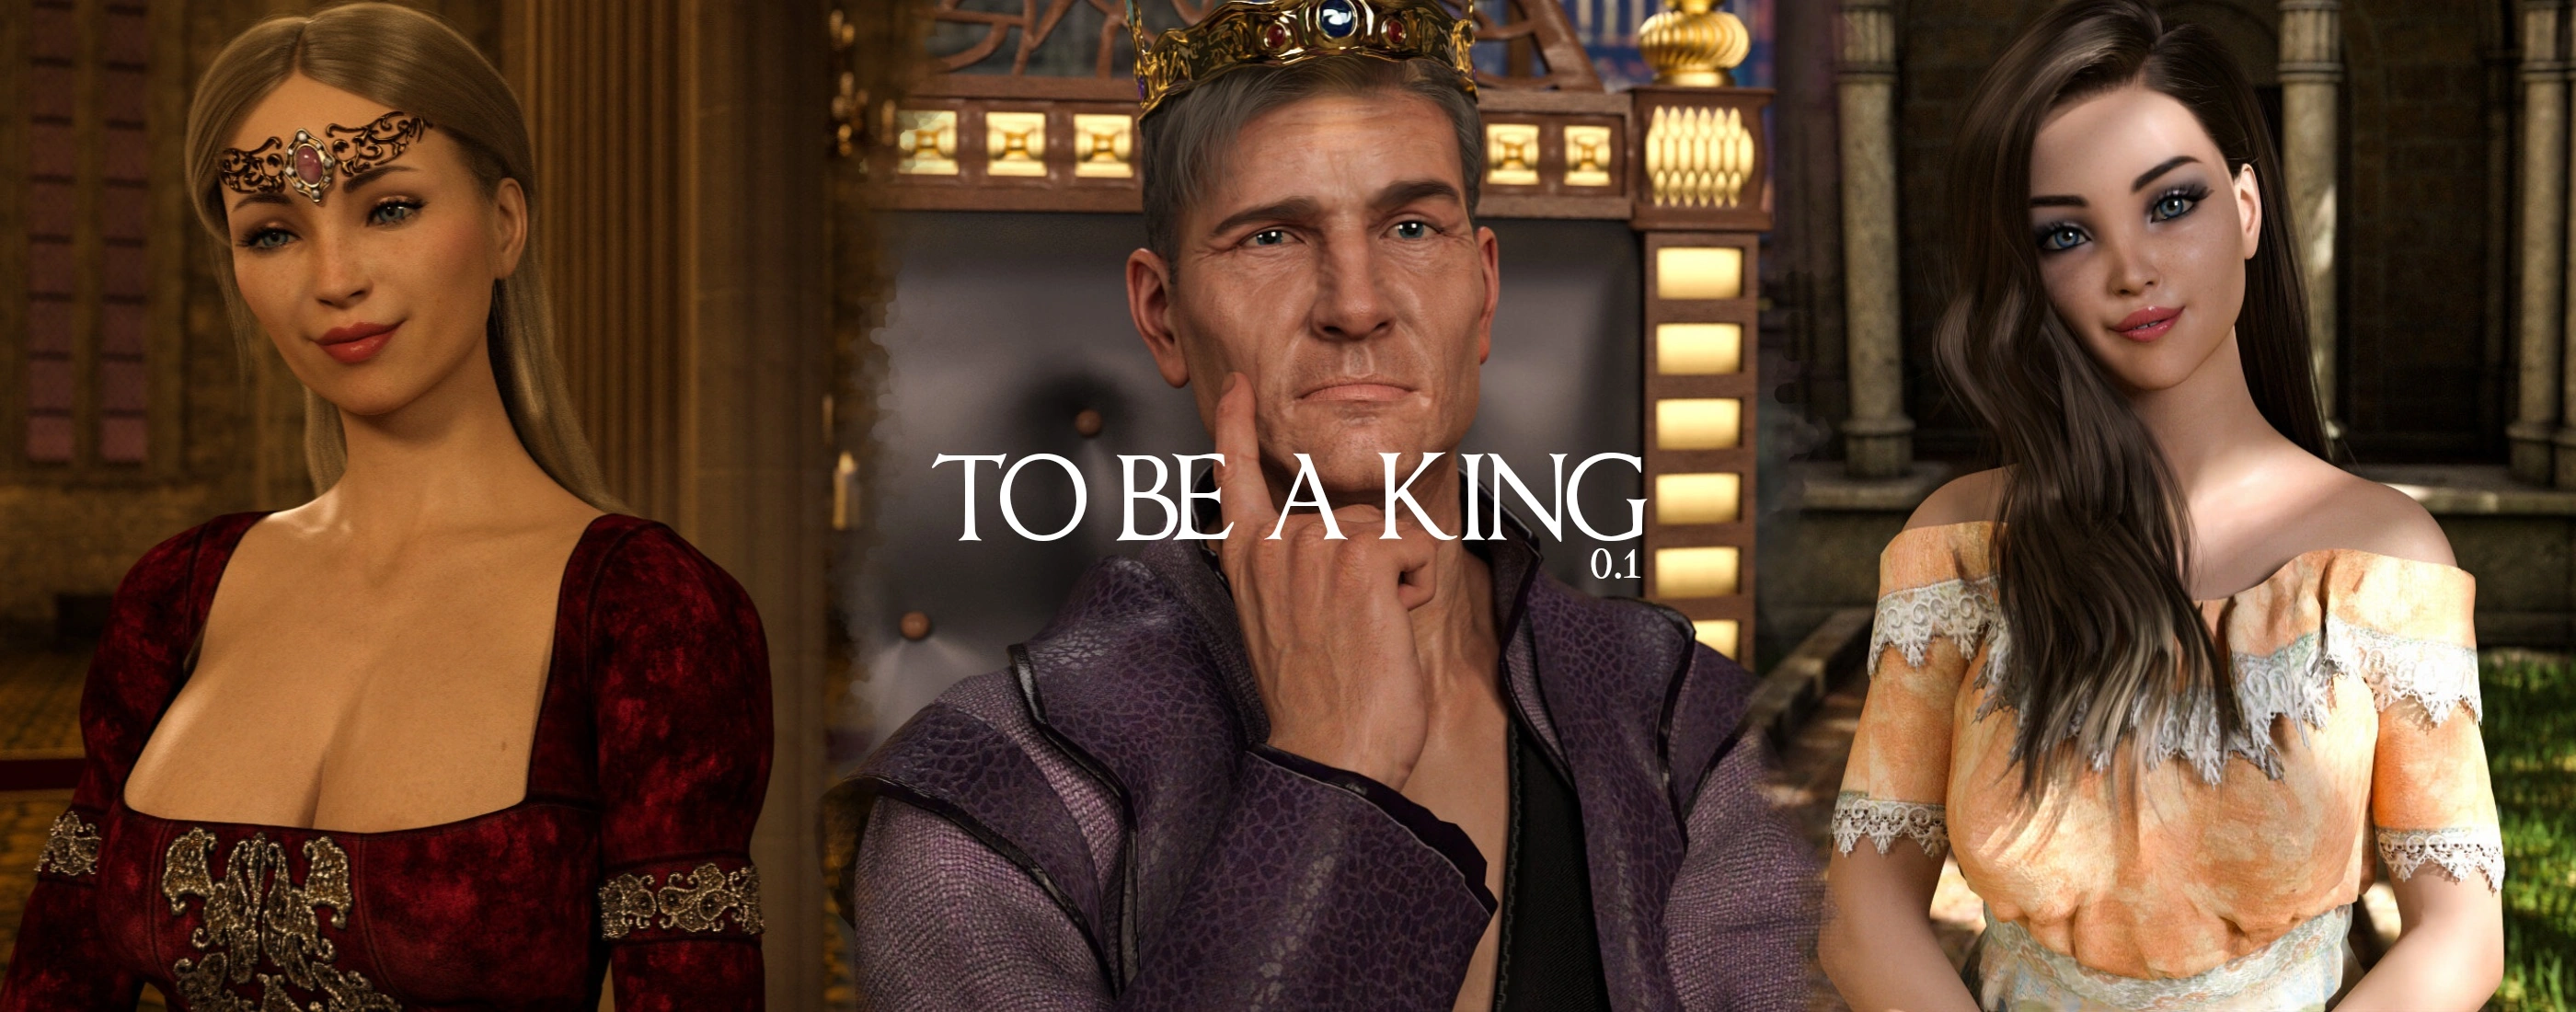 To Be A King [v0.1] main image